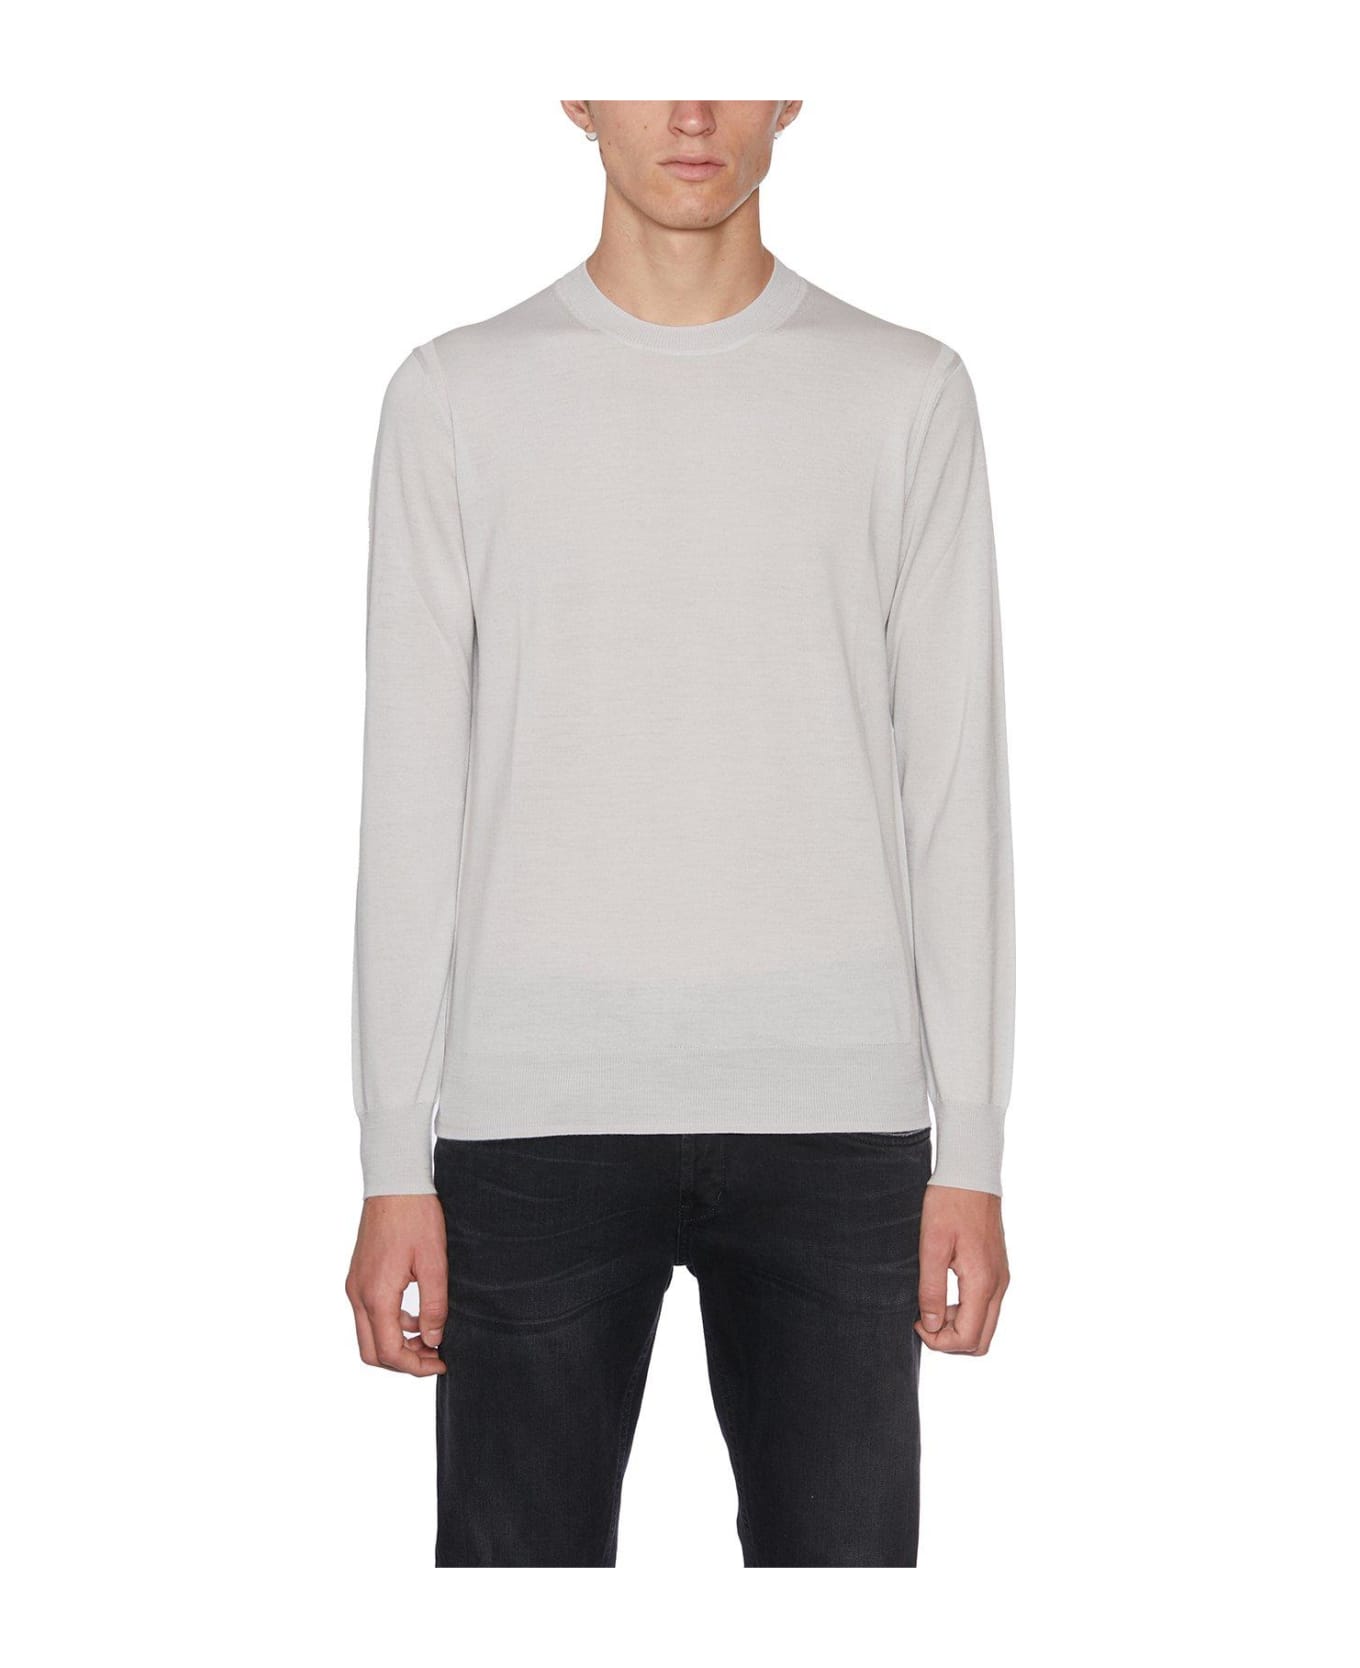 Paolo Pecora Long Sleeved Crewneck Jumper - Gesso フリース